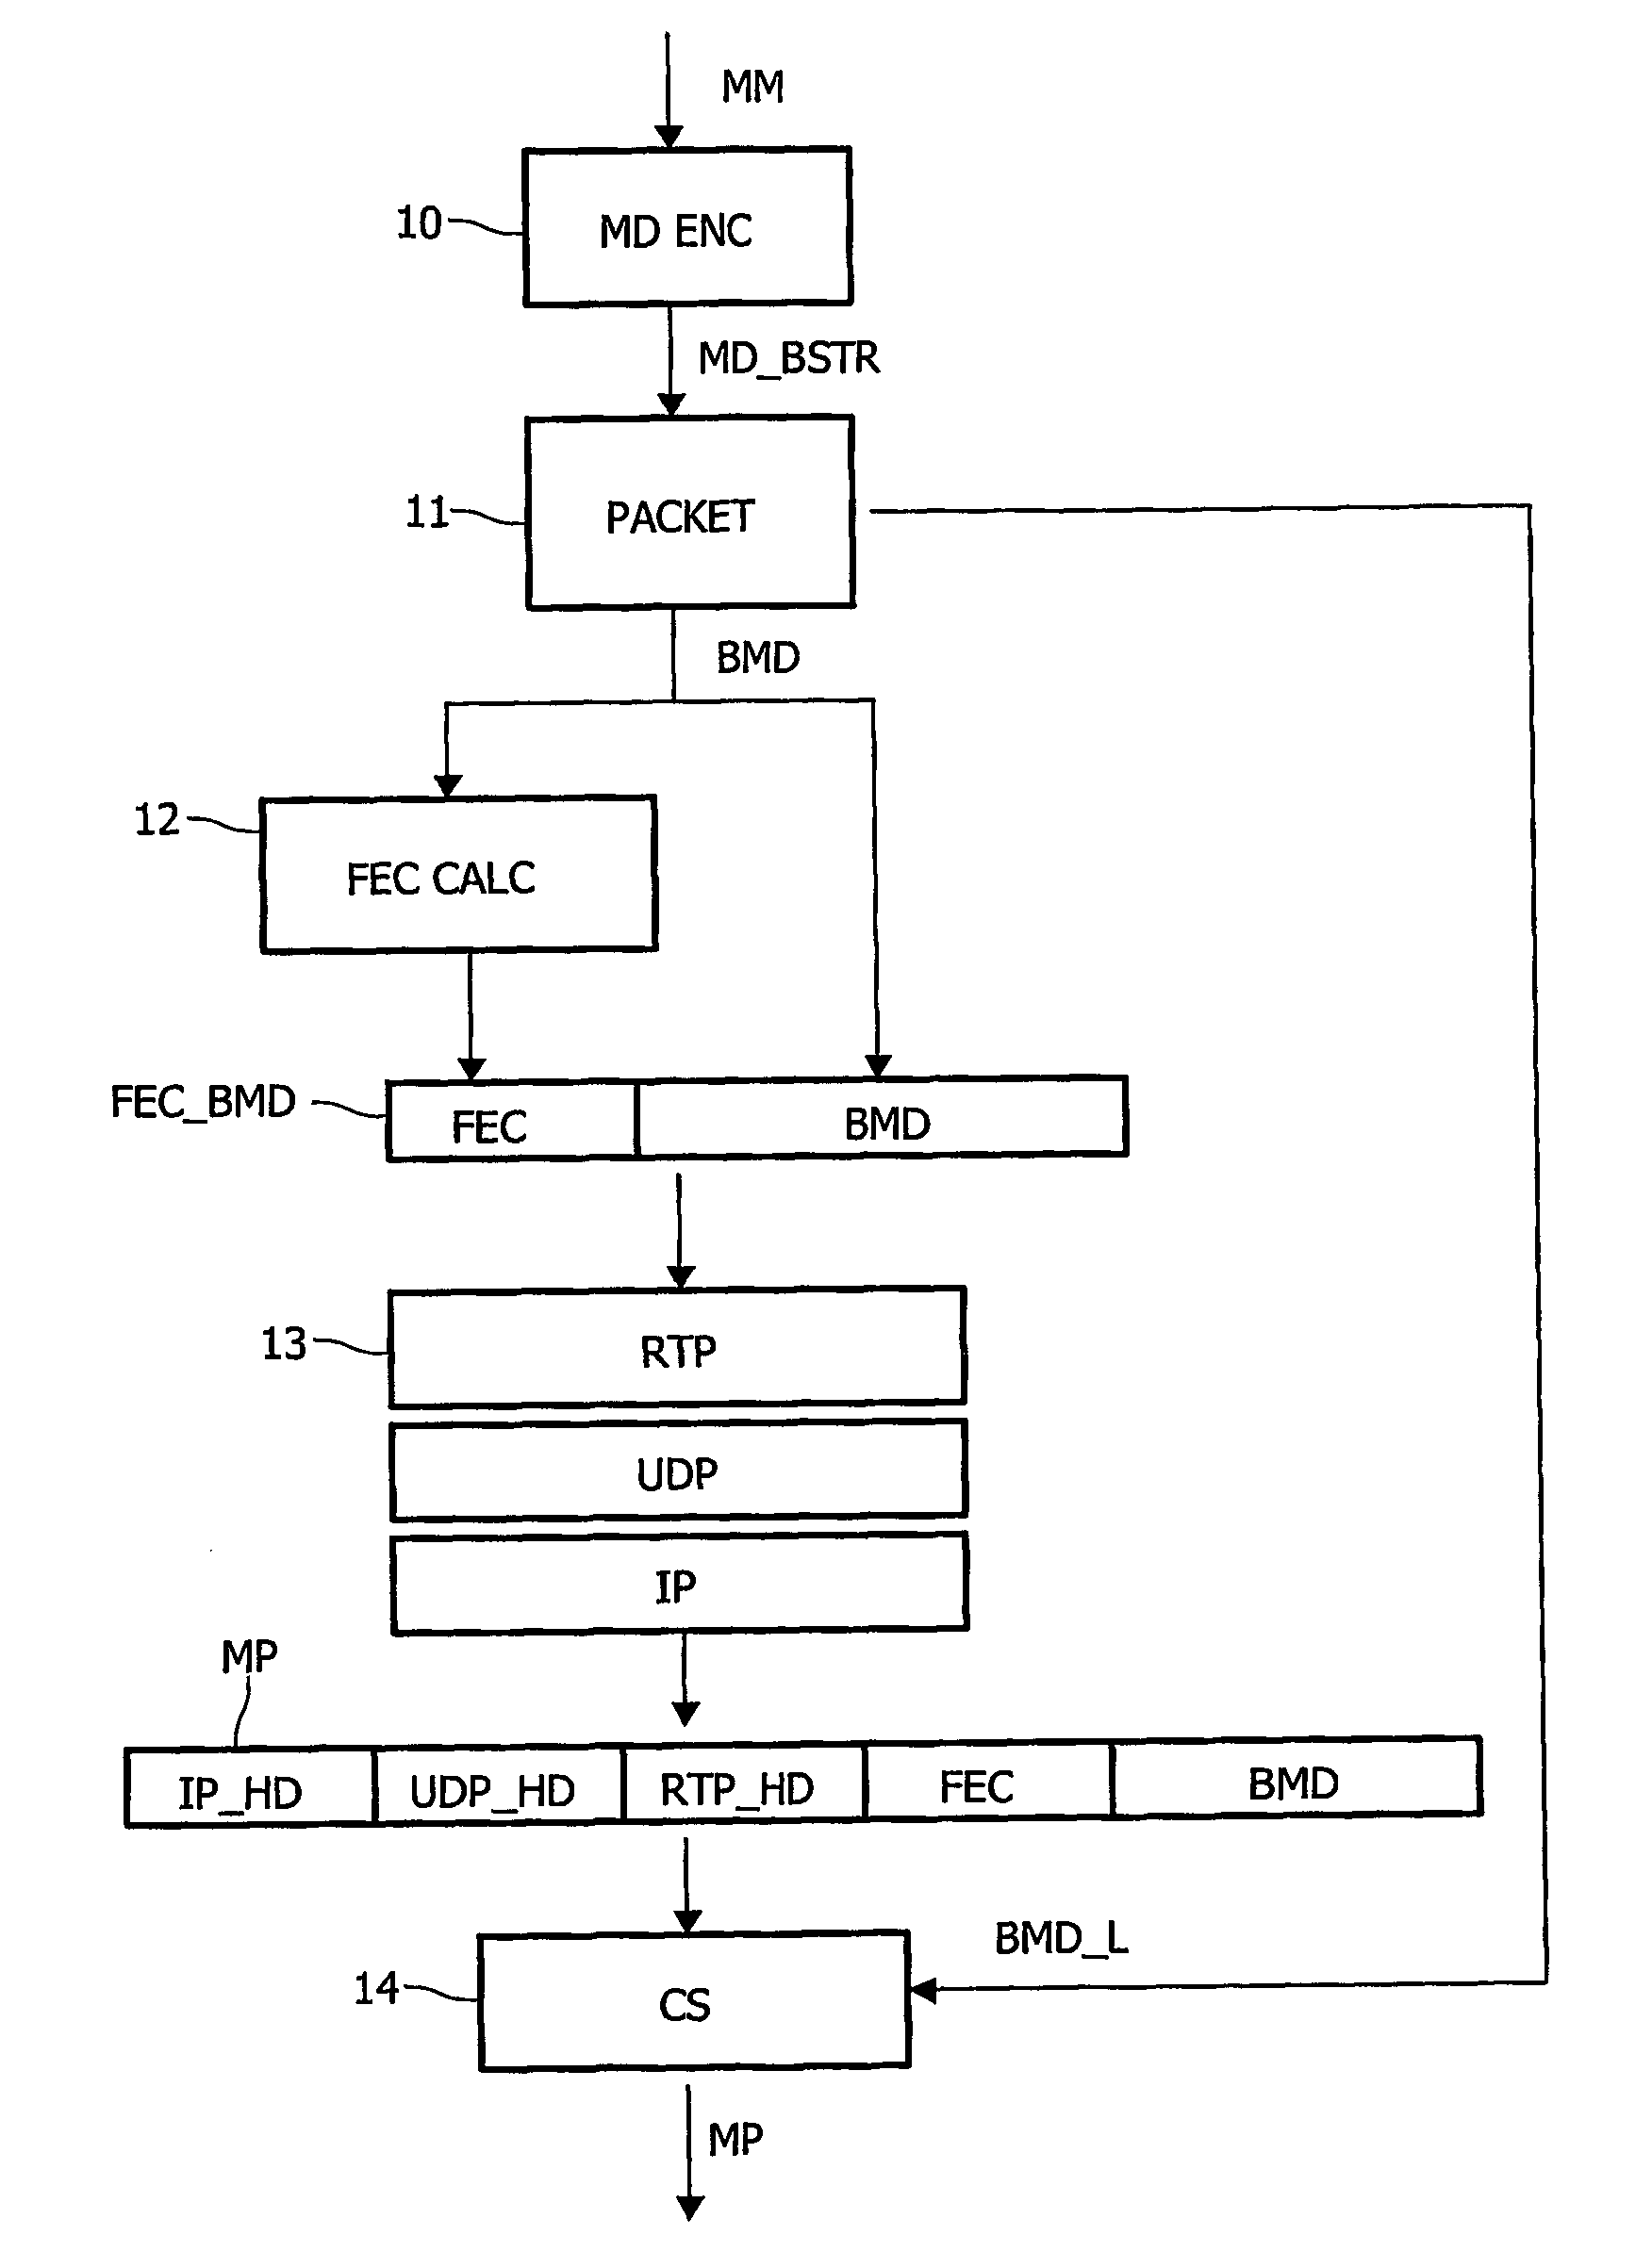 Media packet structure for real time trasnmission via packet switched networks